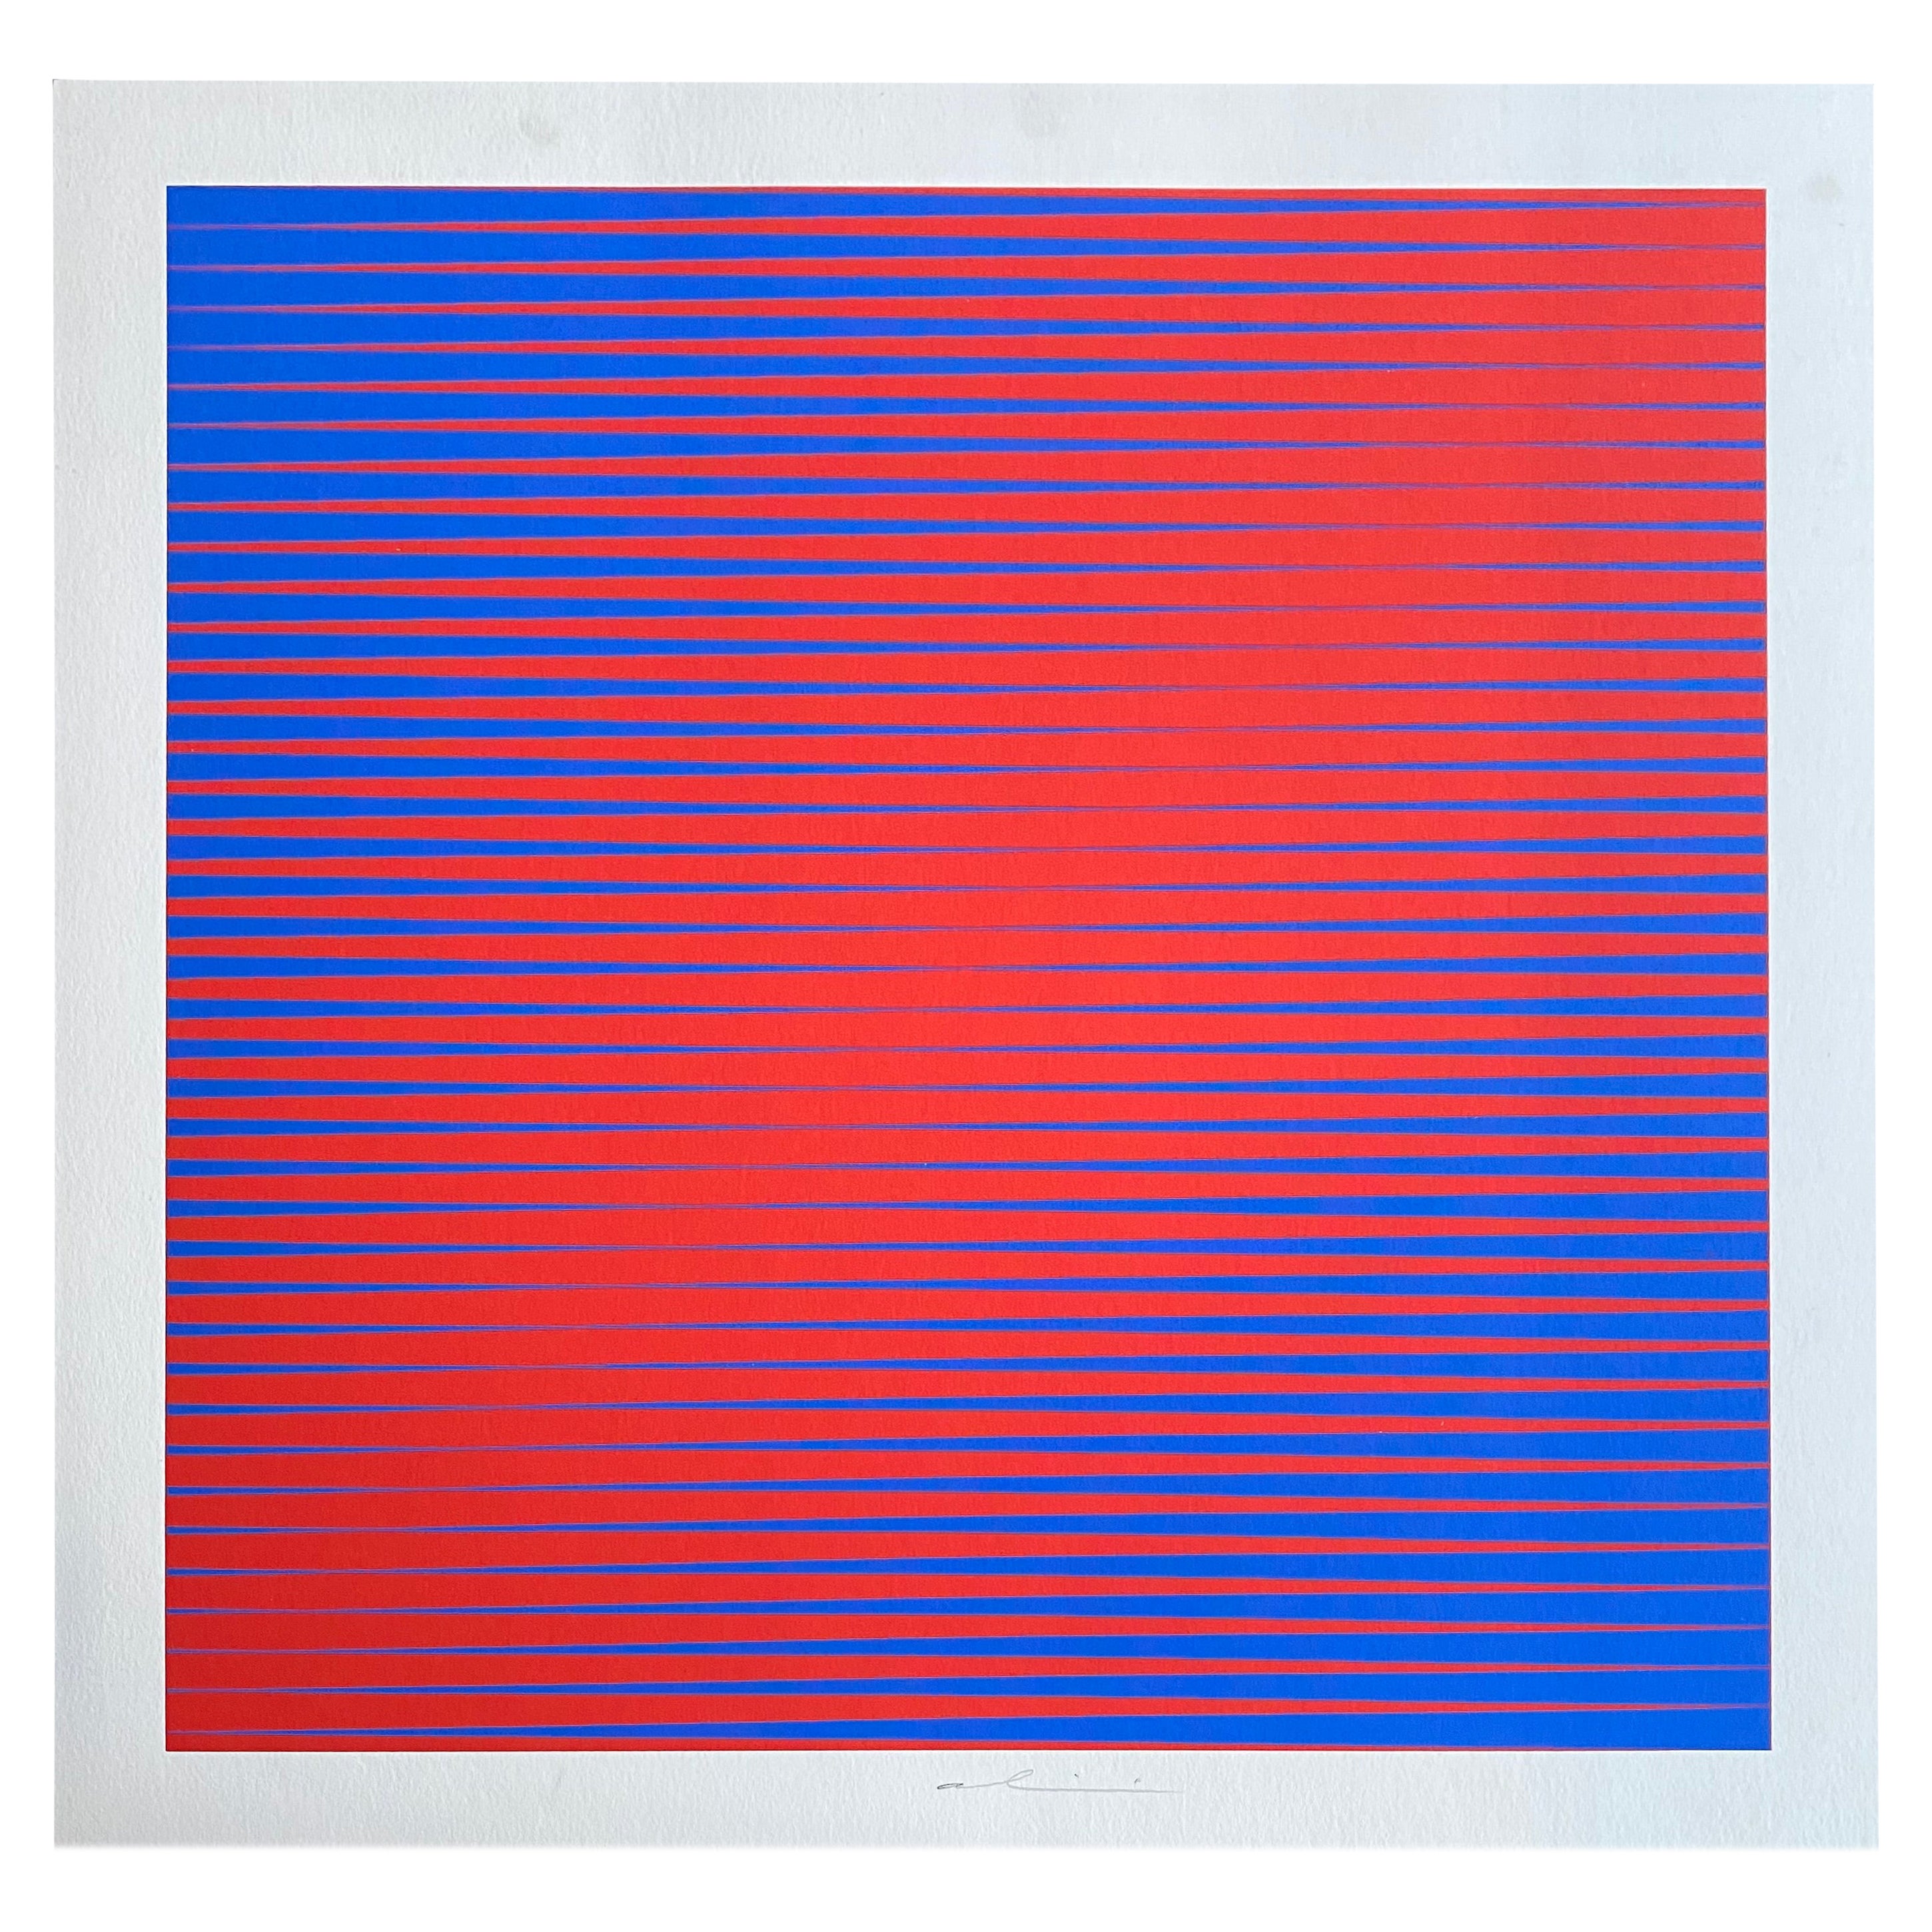 Screenprint in good condition by the Italian Op-Art artist Getulio Alviani. For Sale